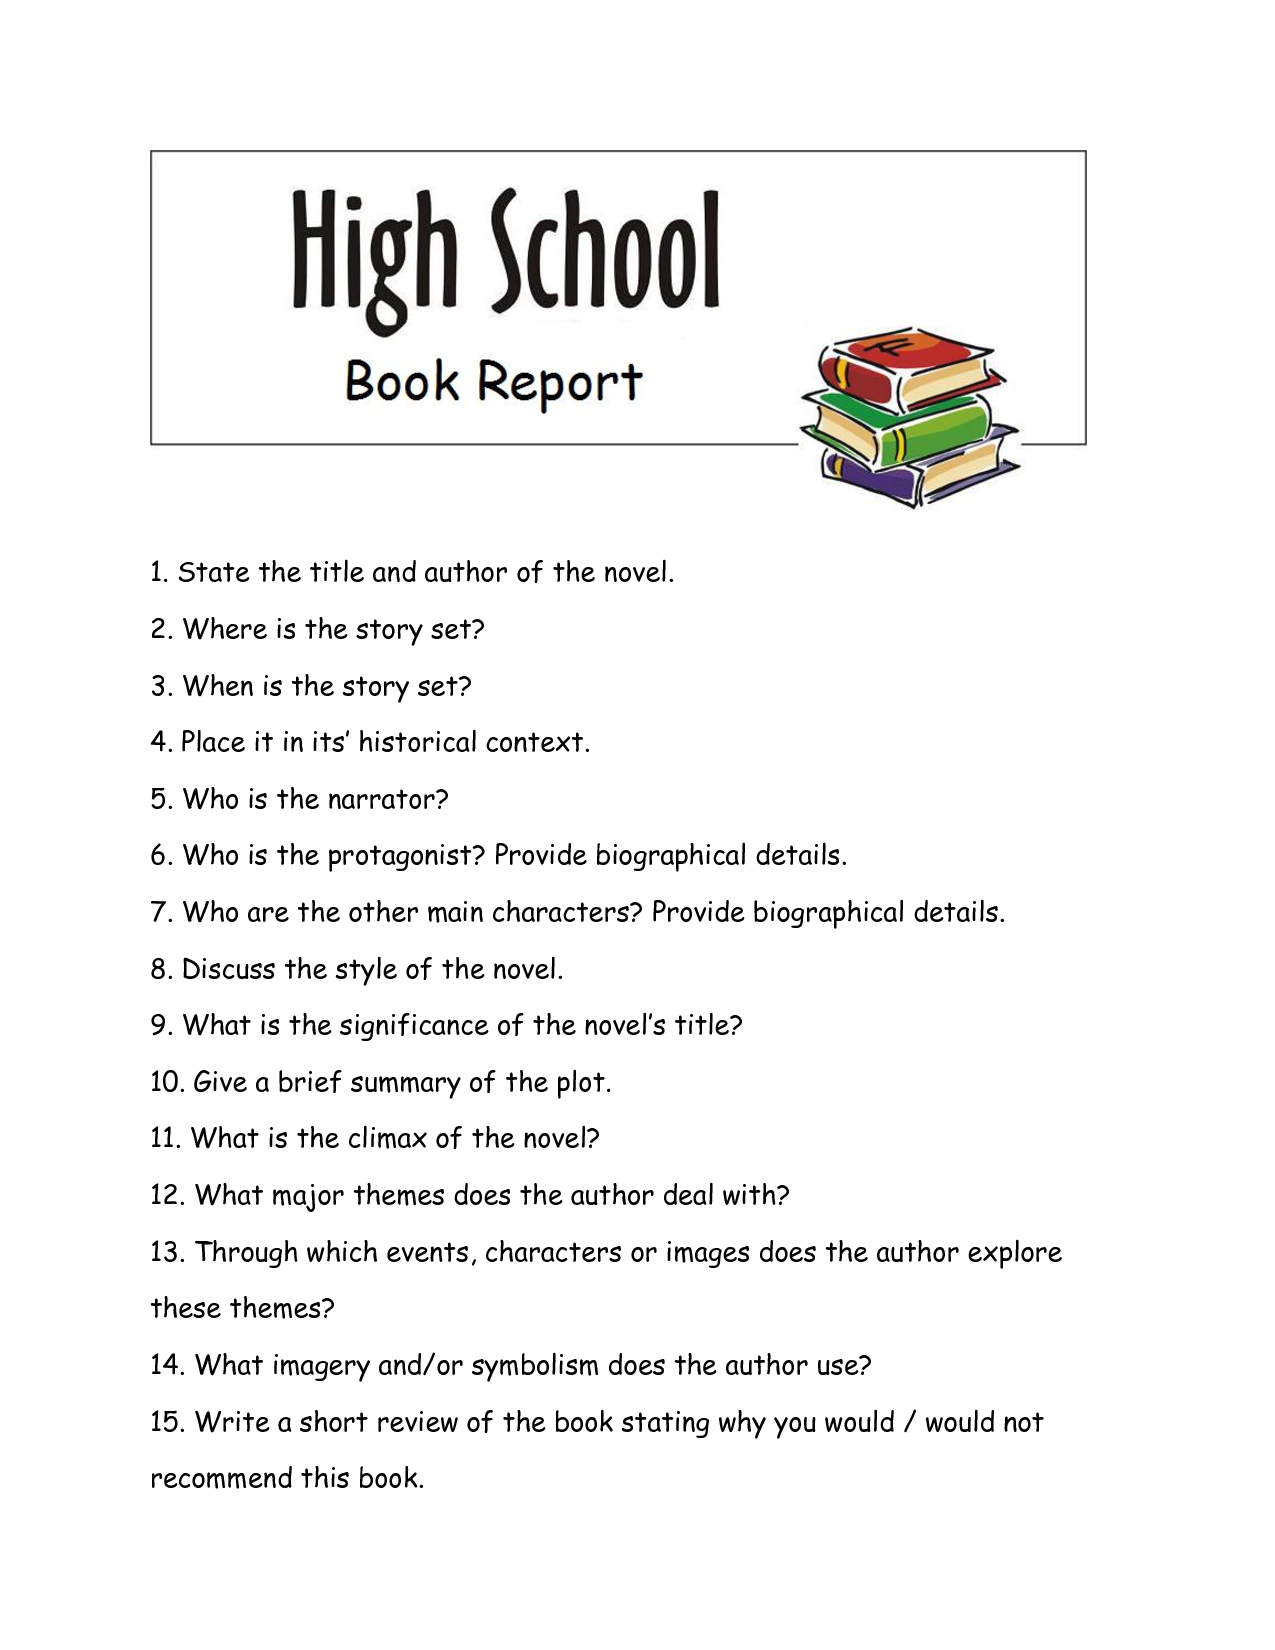 Writing A High School Book Report – How To Write A Book With High School Book Report Template